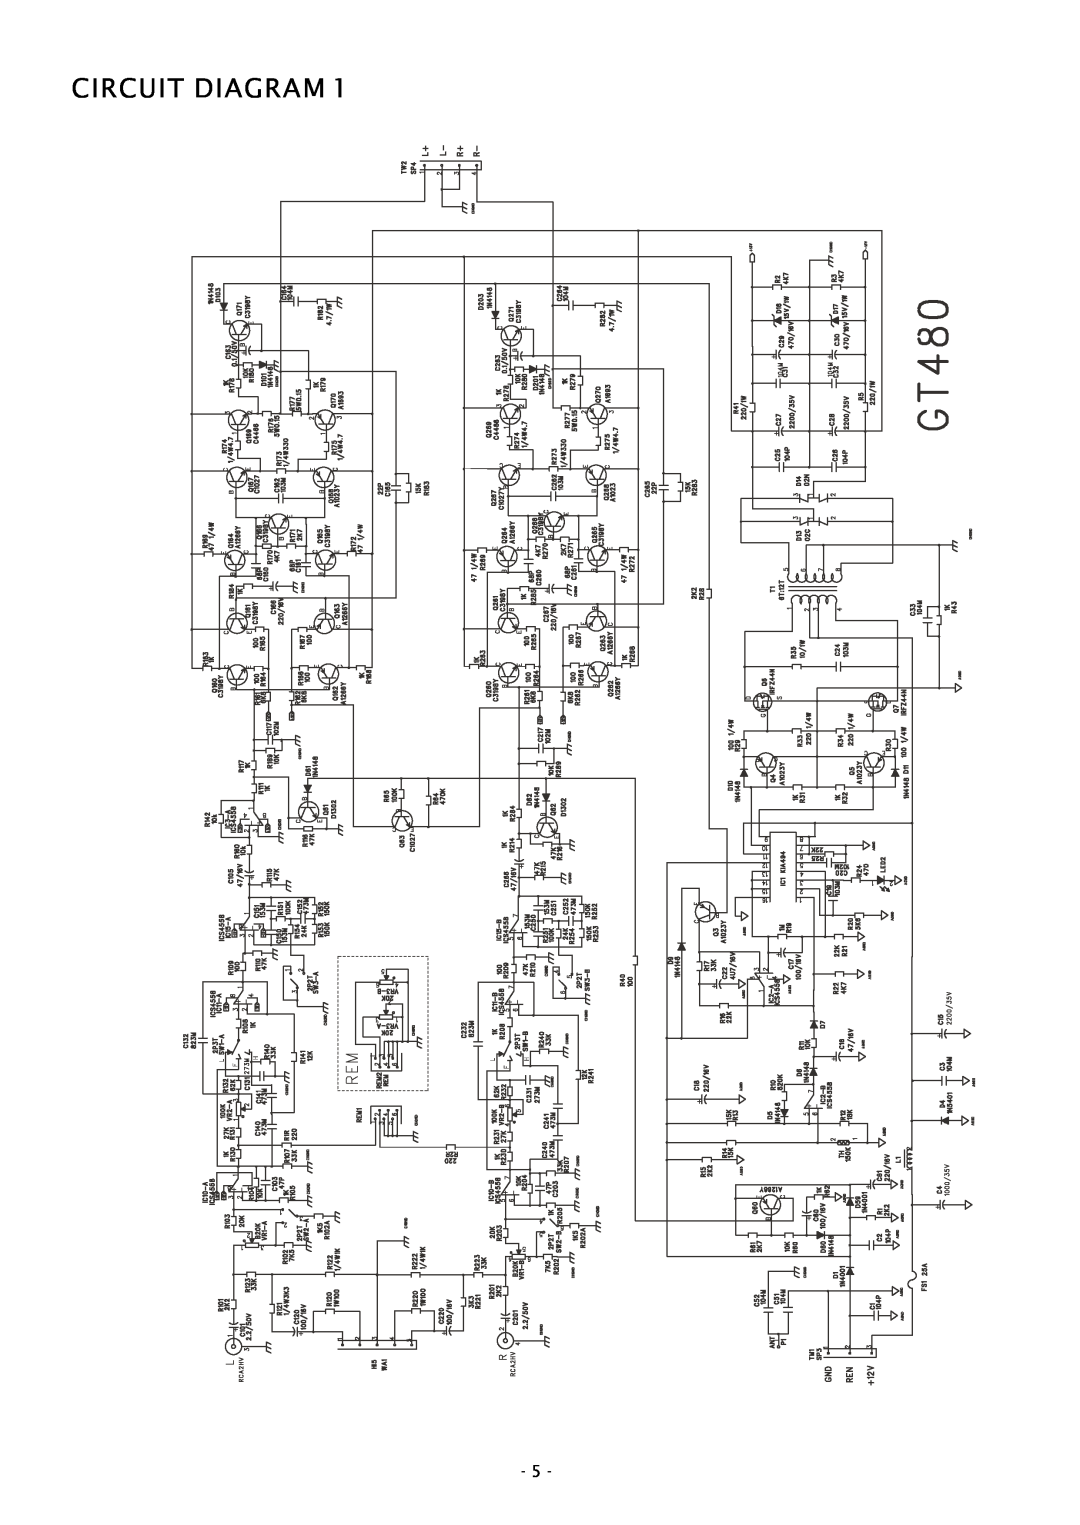 Boss Audio Systems GT480 service manual Circuit Diagram 